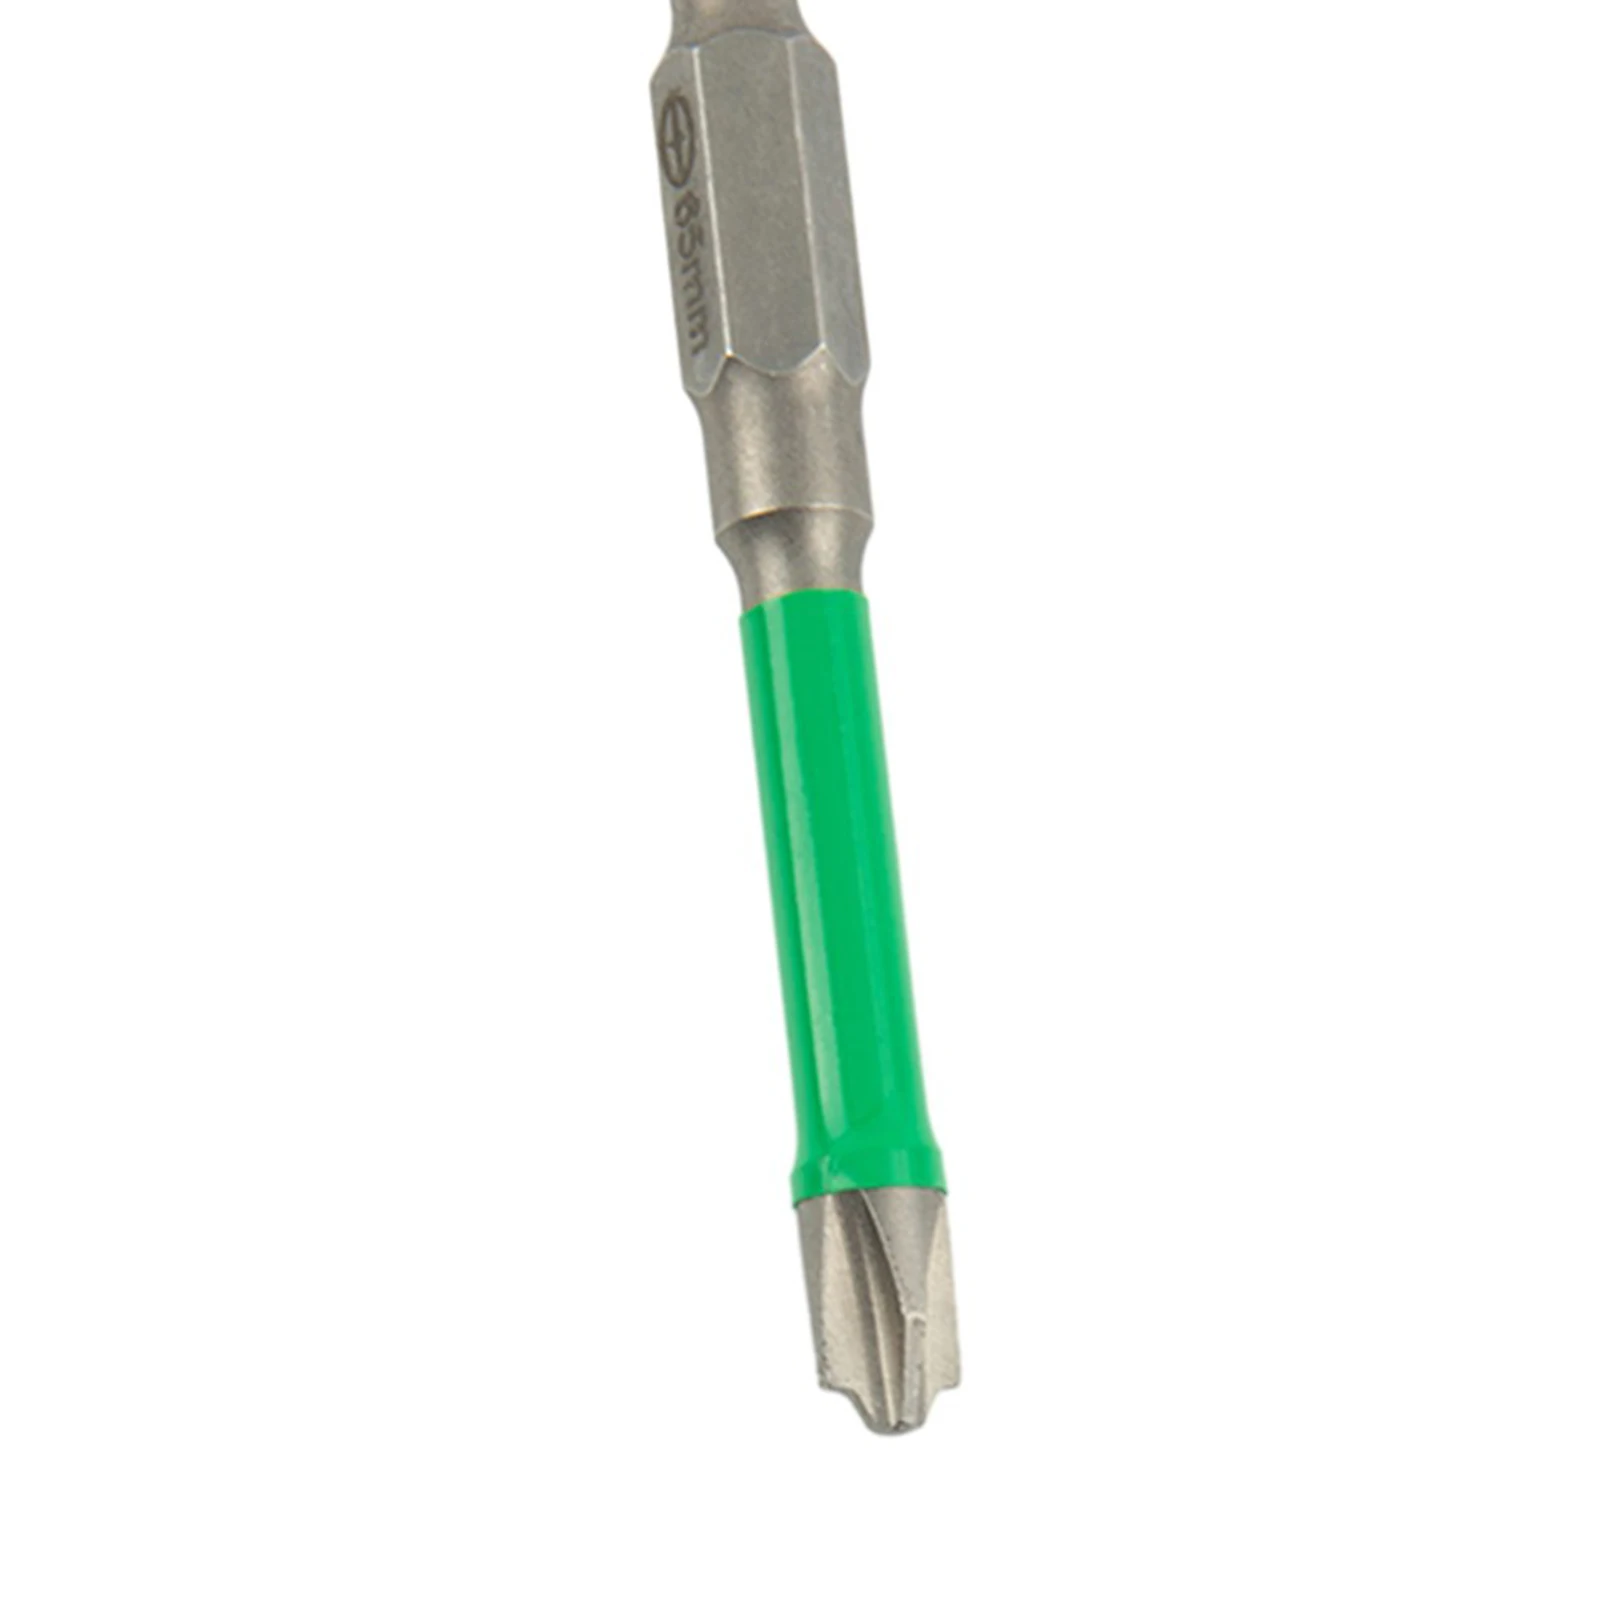 batch head screwdriver bit power tools screwdriver bit slotted special switch 110mm cross fph2 for socket green 65mm 110mm 150mm Magnetic Special Slotted Cross Screwdriver Bit Nutdrivers For Electrician FPH2 For Socket Switch Hand Tools